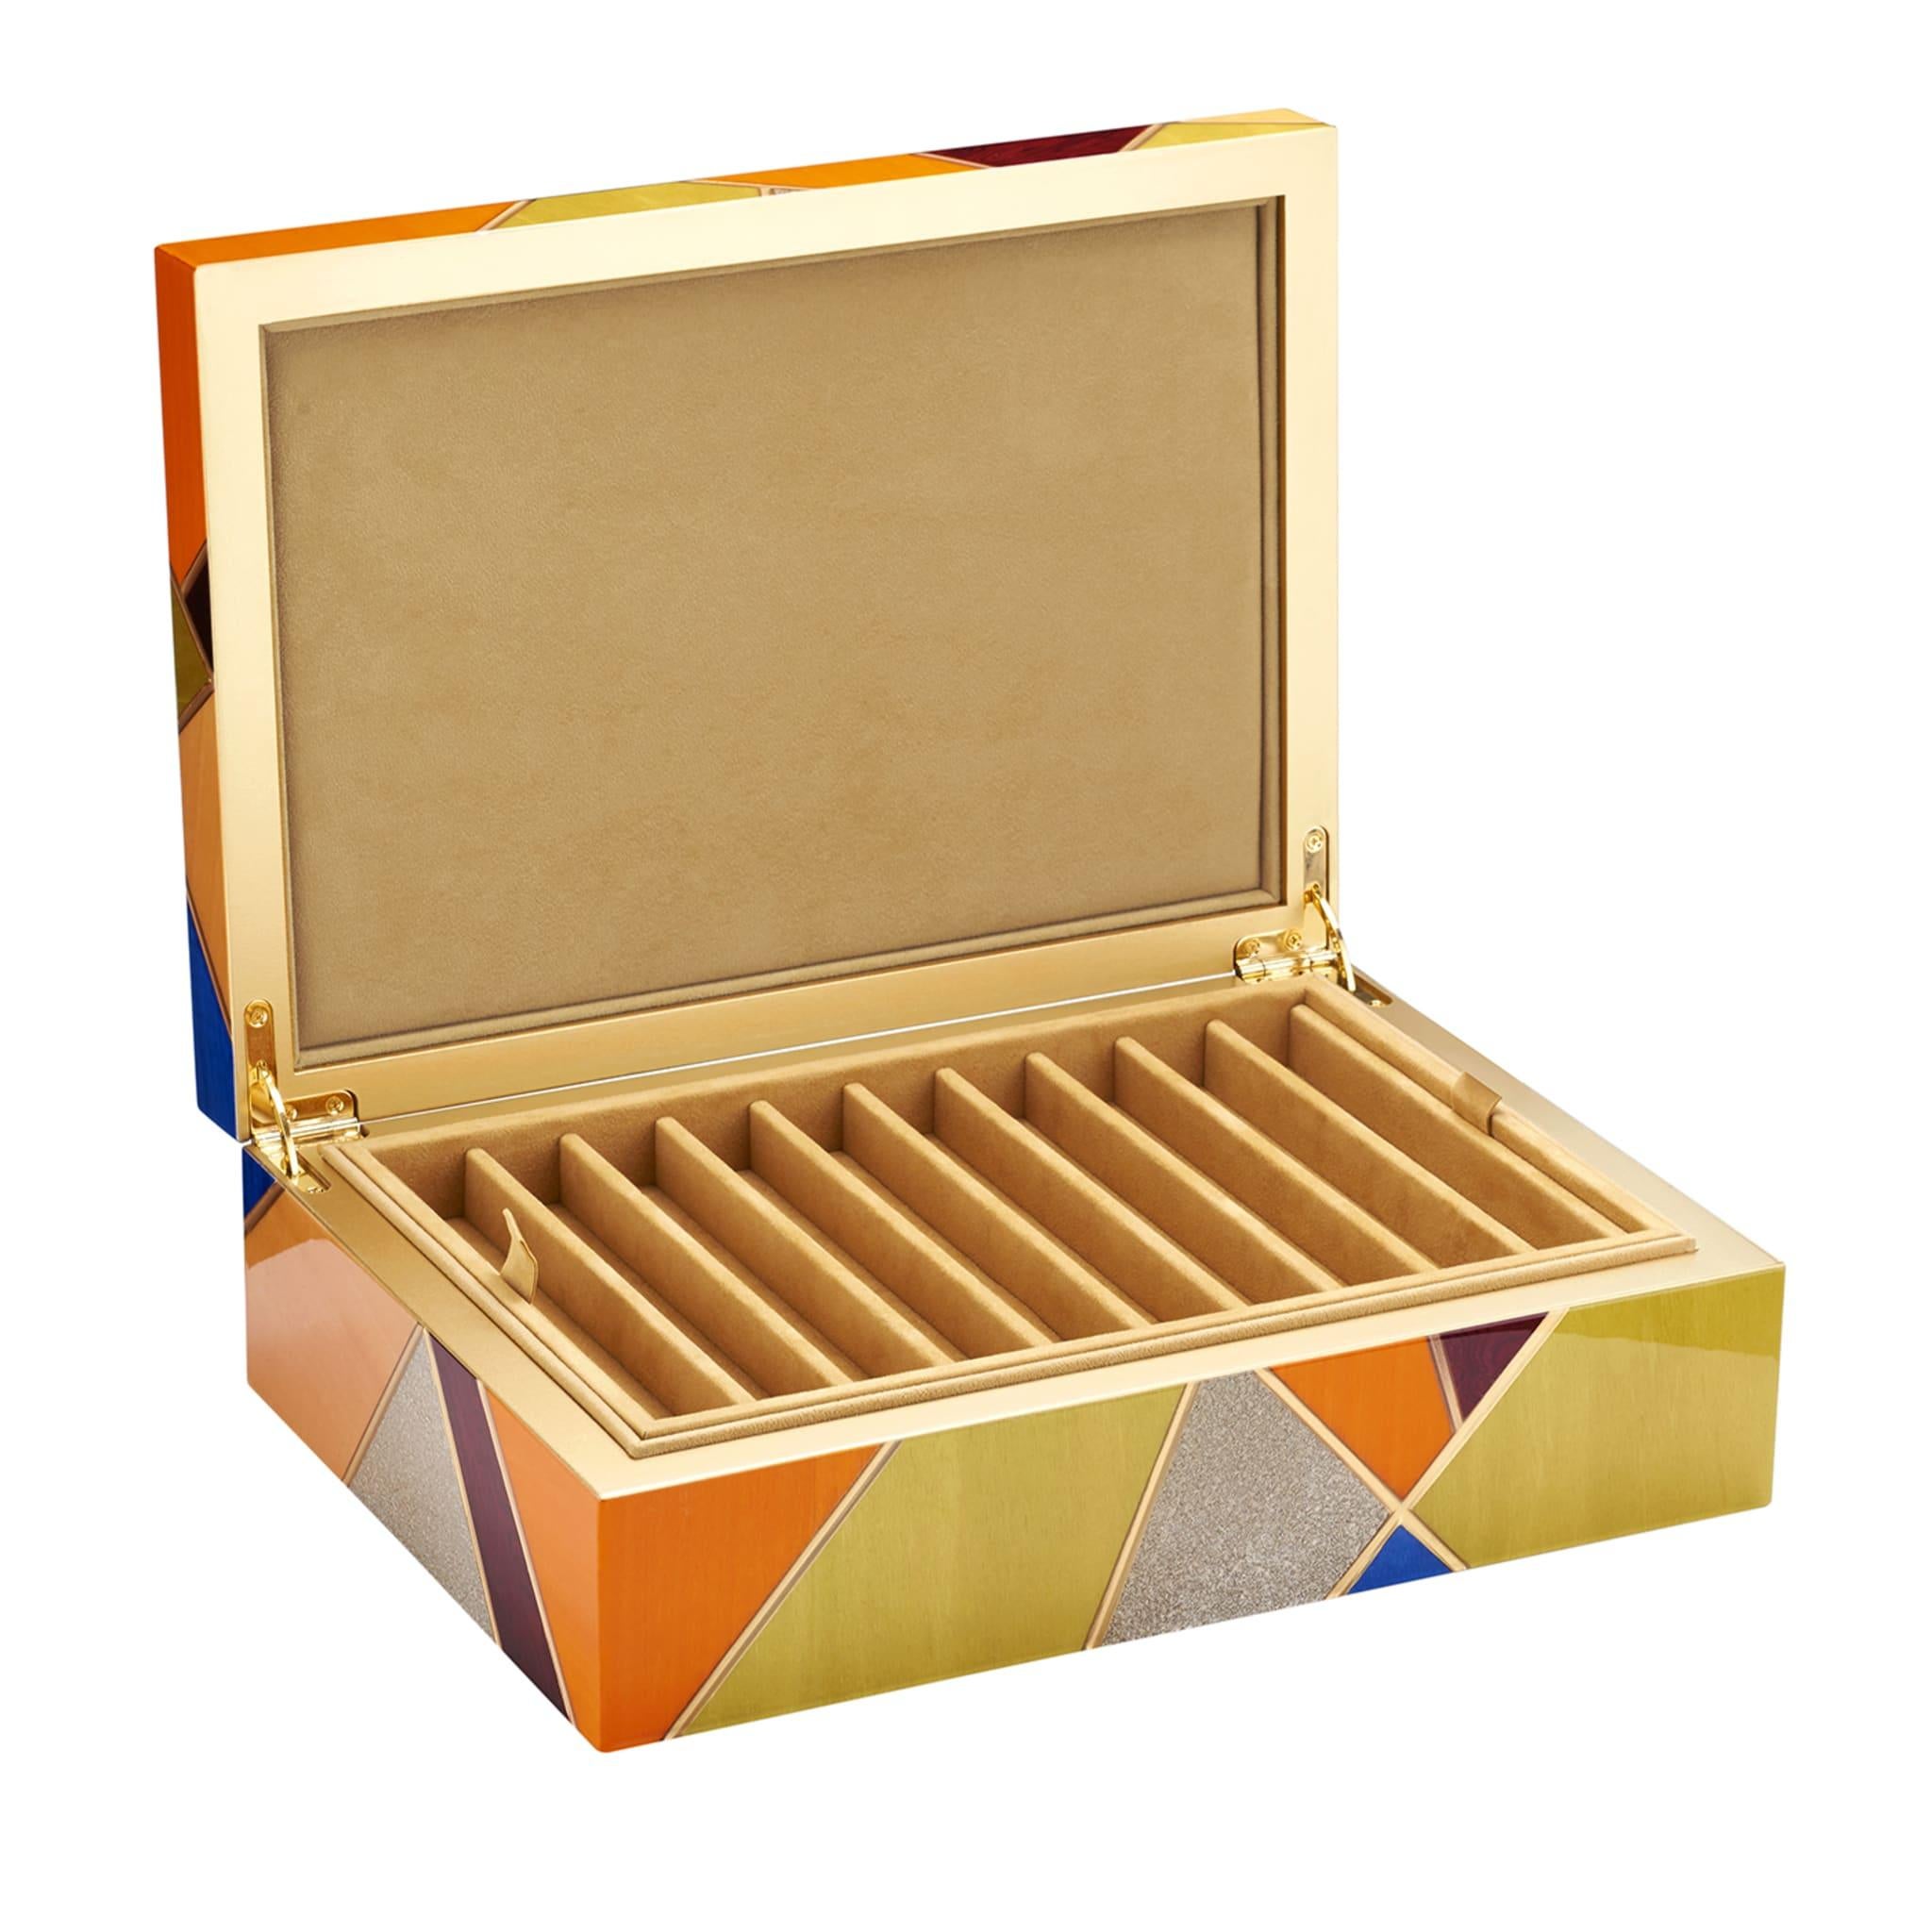 Part of the Tellux Sibilla Collection, this box is a precious piece crafted by hand where to gather precious pens within a soft Alcantara-lined nest. Inlays of rosewood, Bolivar, ash, and ebony enriched with vibrant contrasting hues lend the